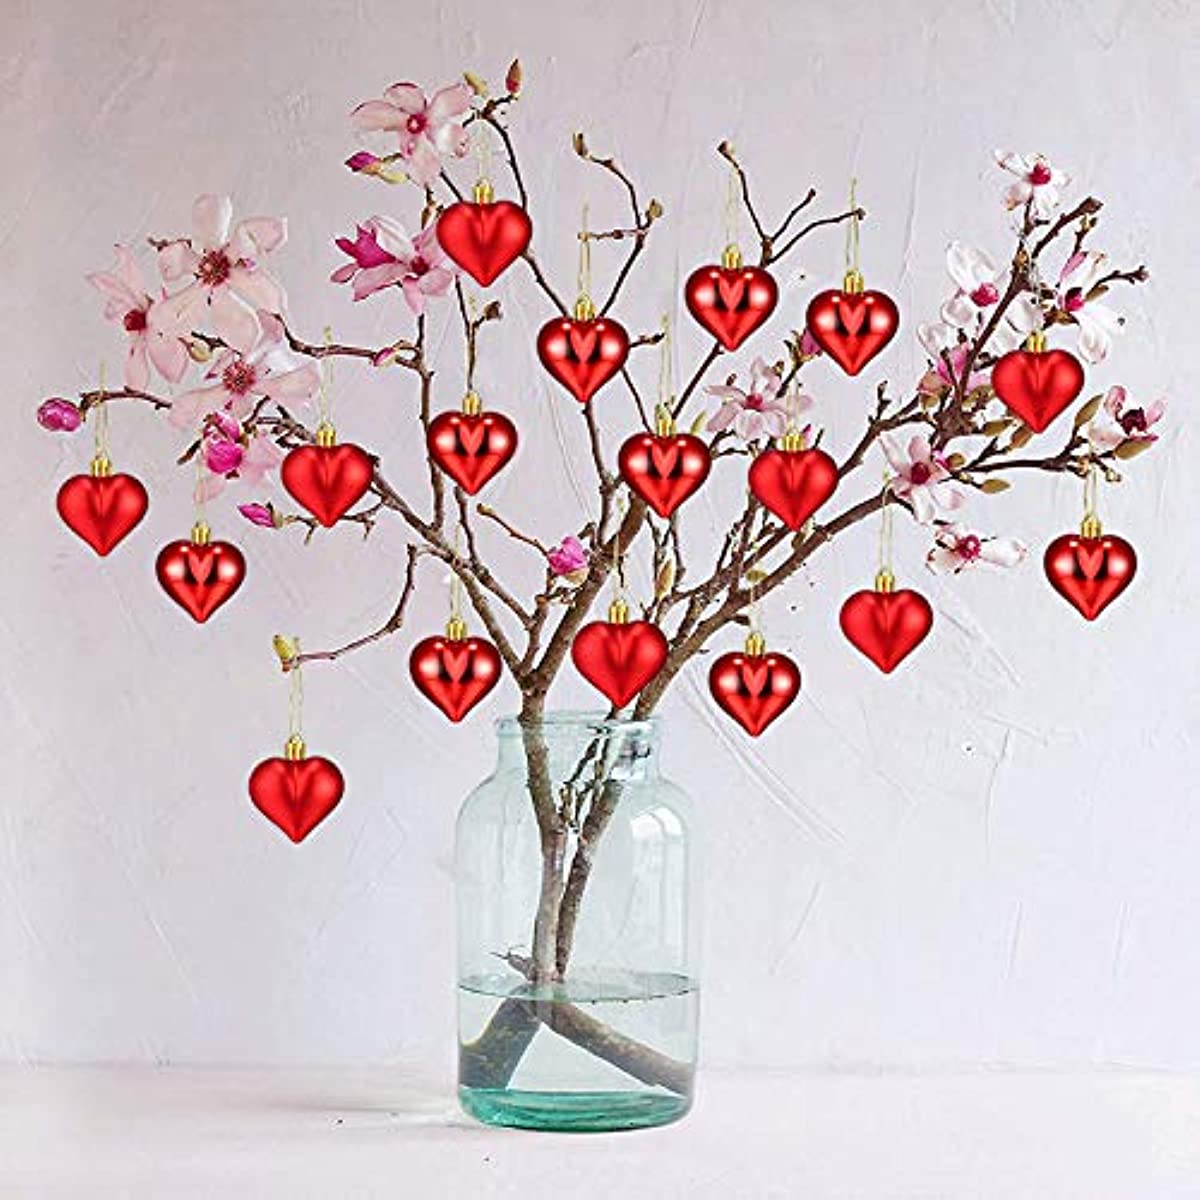 12pcs Vintage Valentines Ornaments For Valentine's Day Tree Decorations-  Wooden Hanging Heart Valentine's Ornaments For Tree Decor Valentines Party  Fa